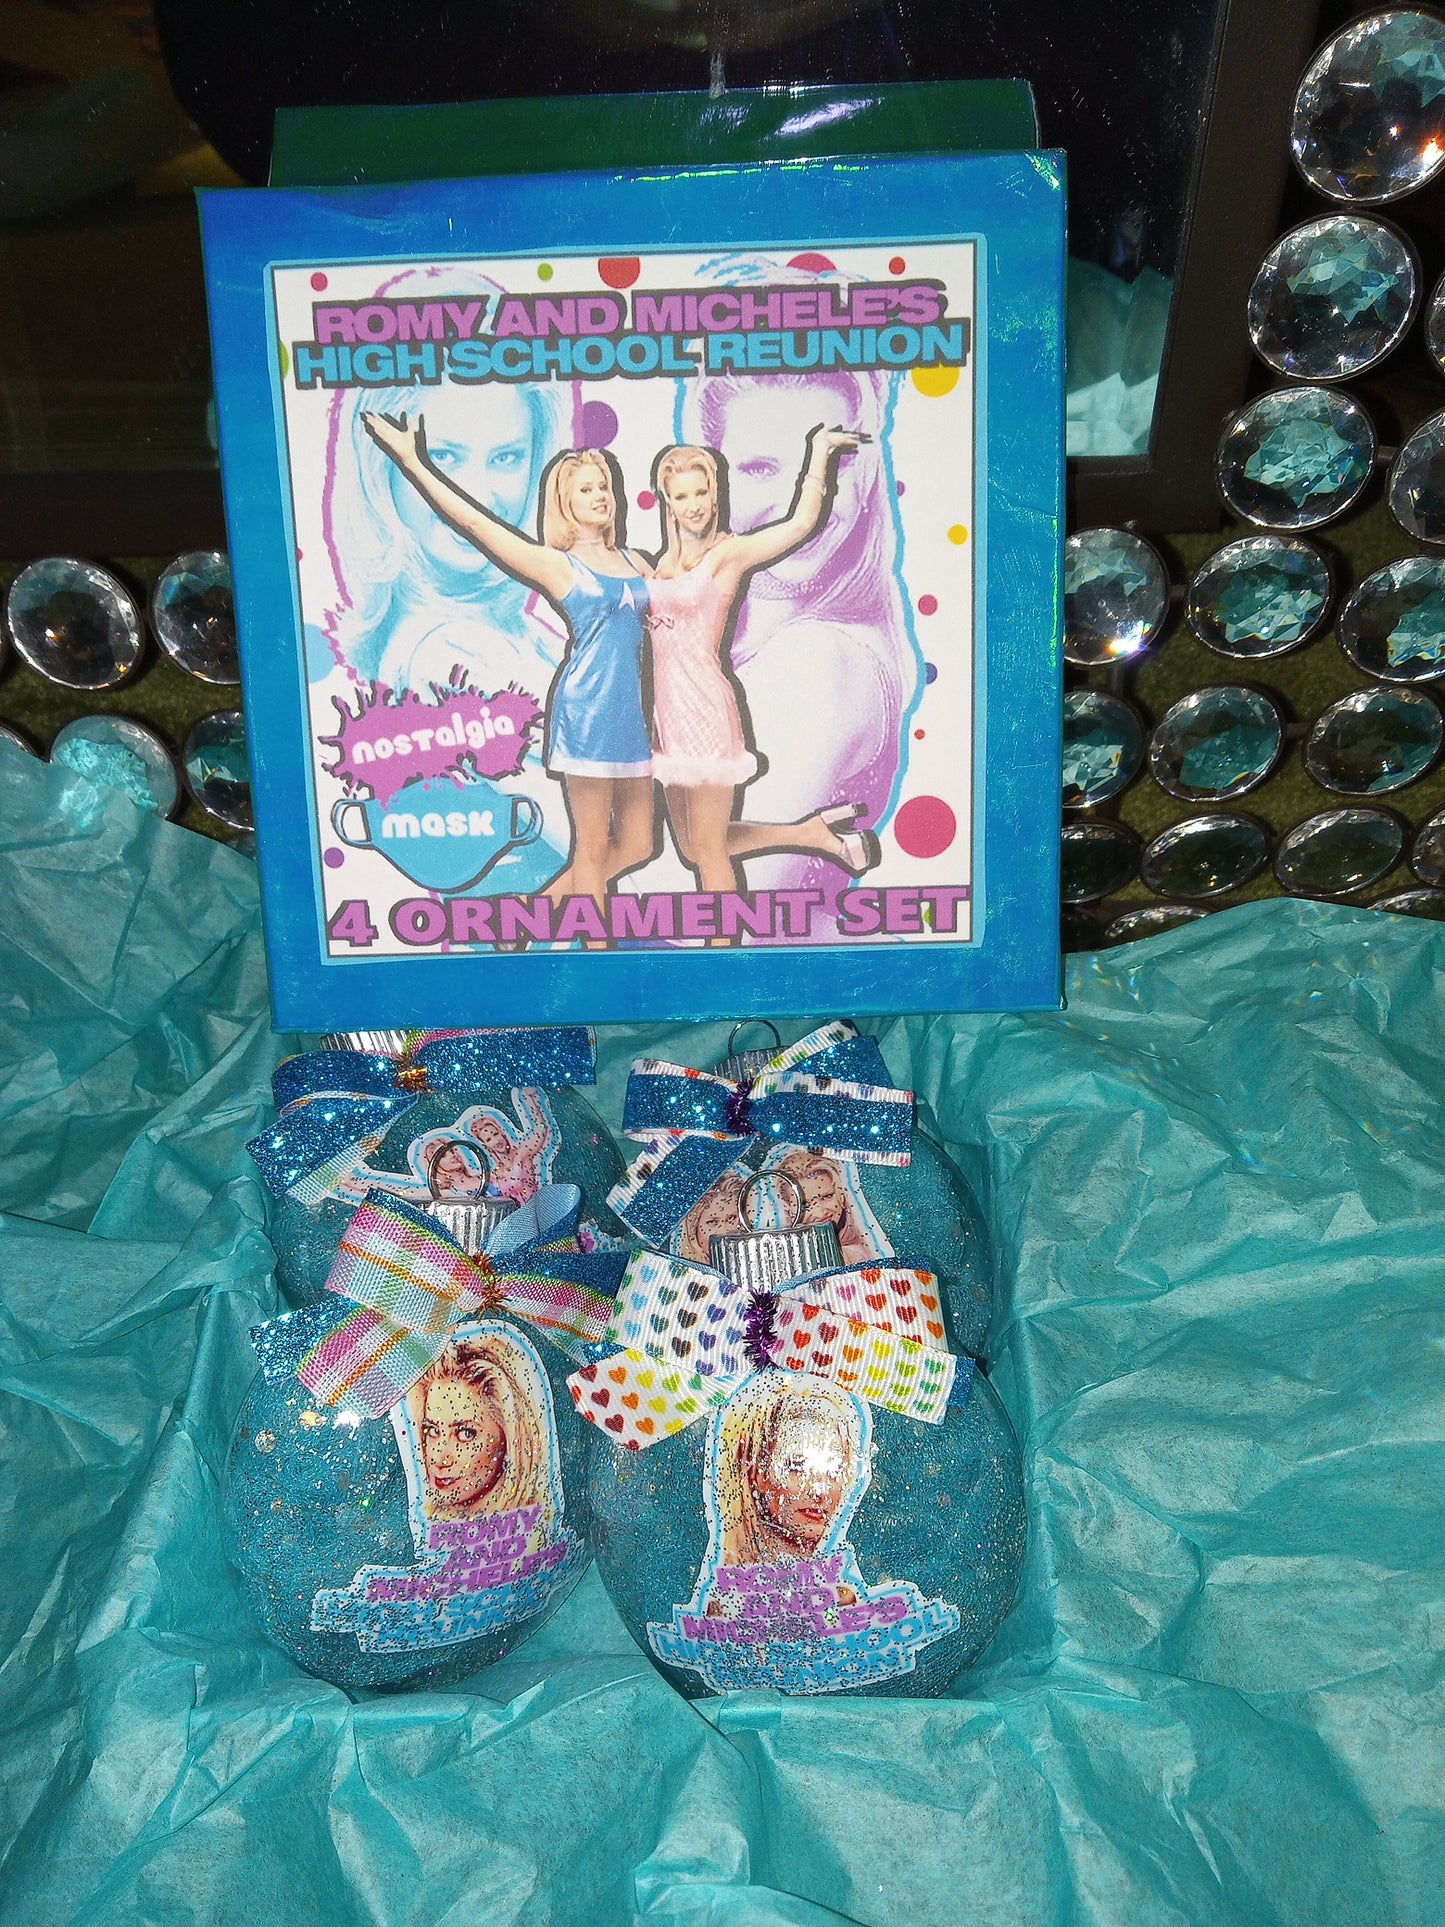 Romy and Michele's High School Reunion 4 Ornament Set in Box